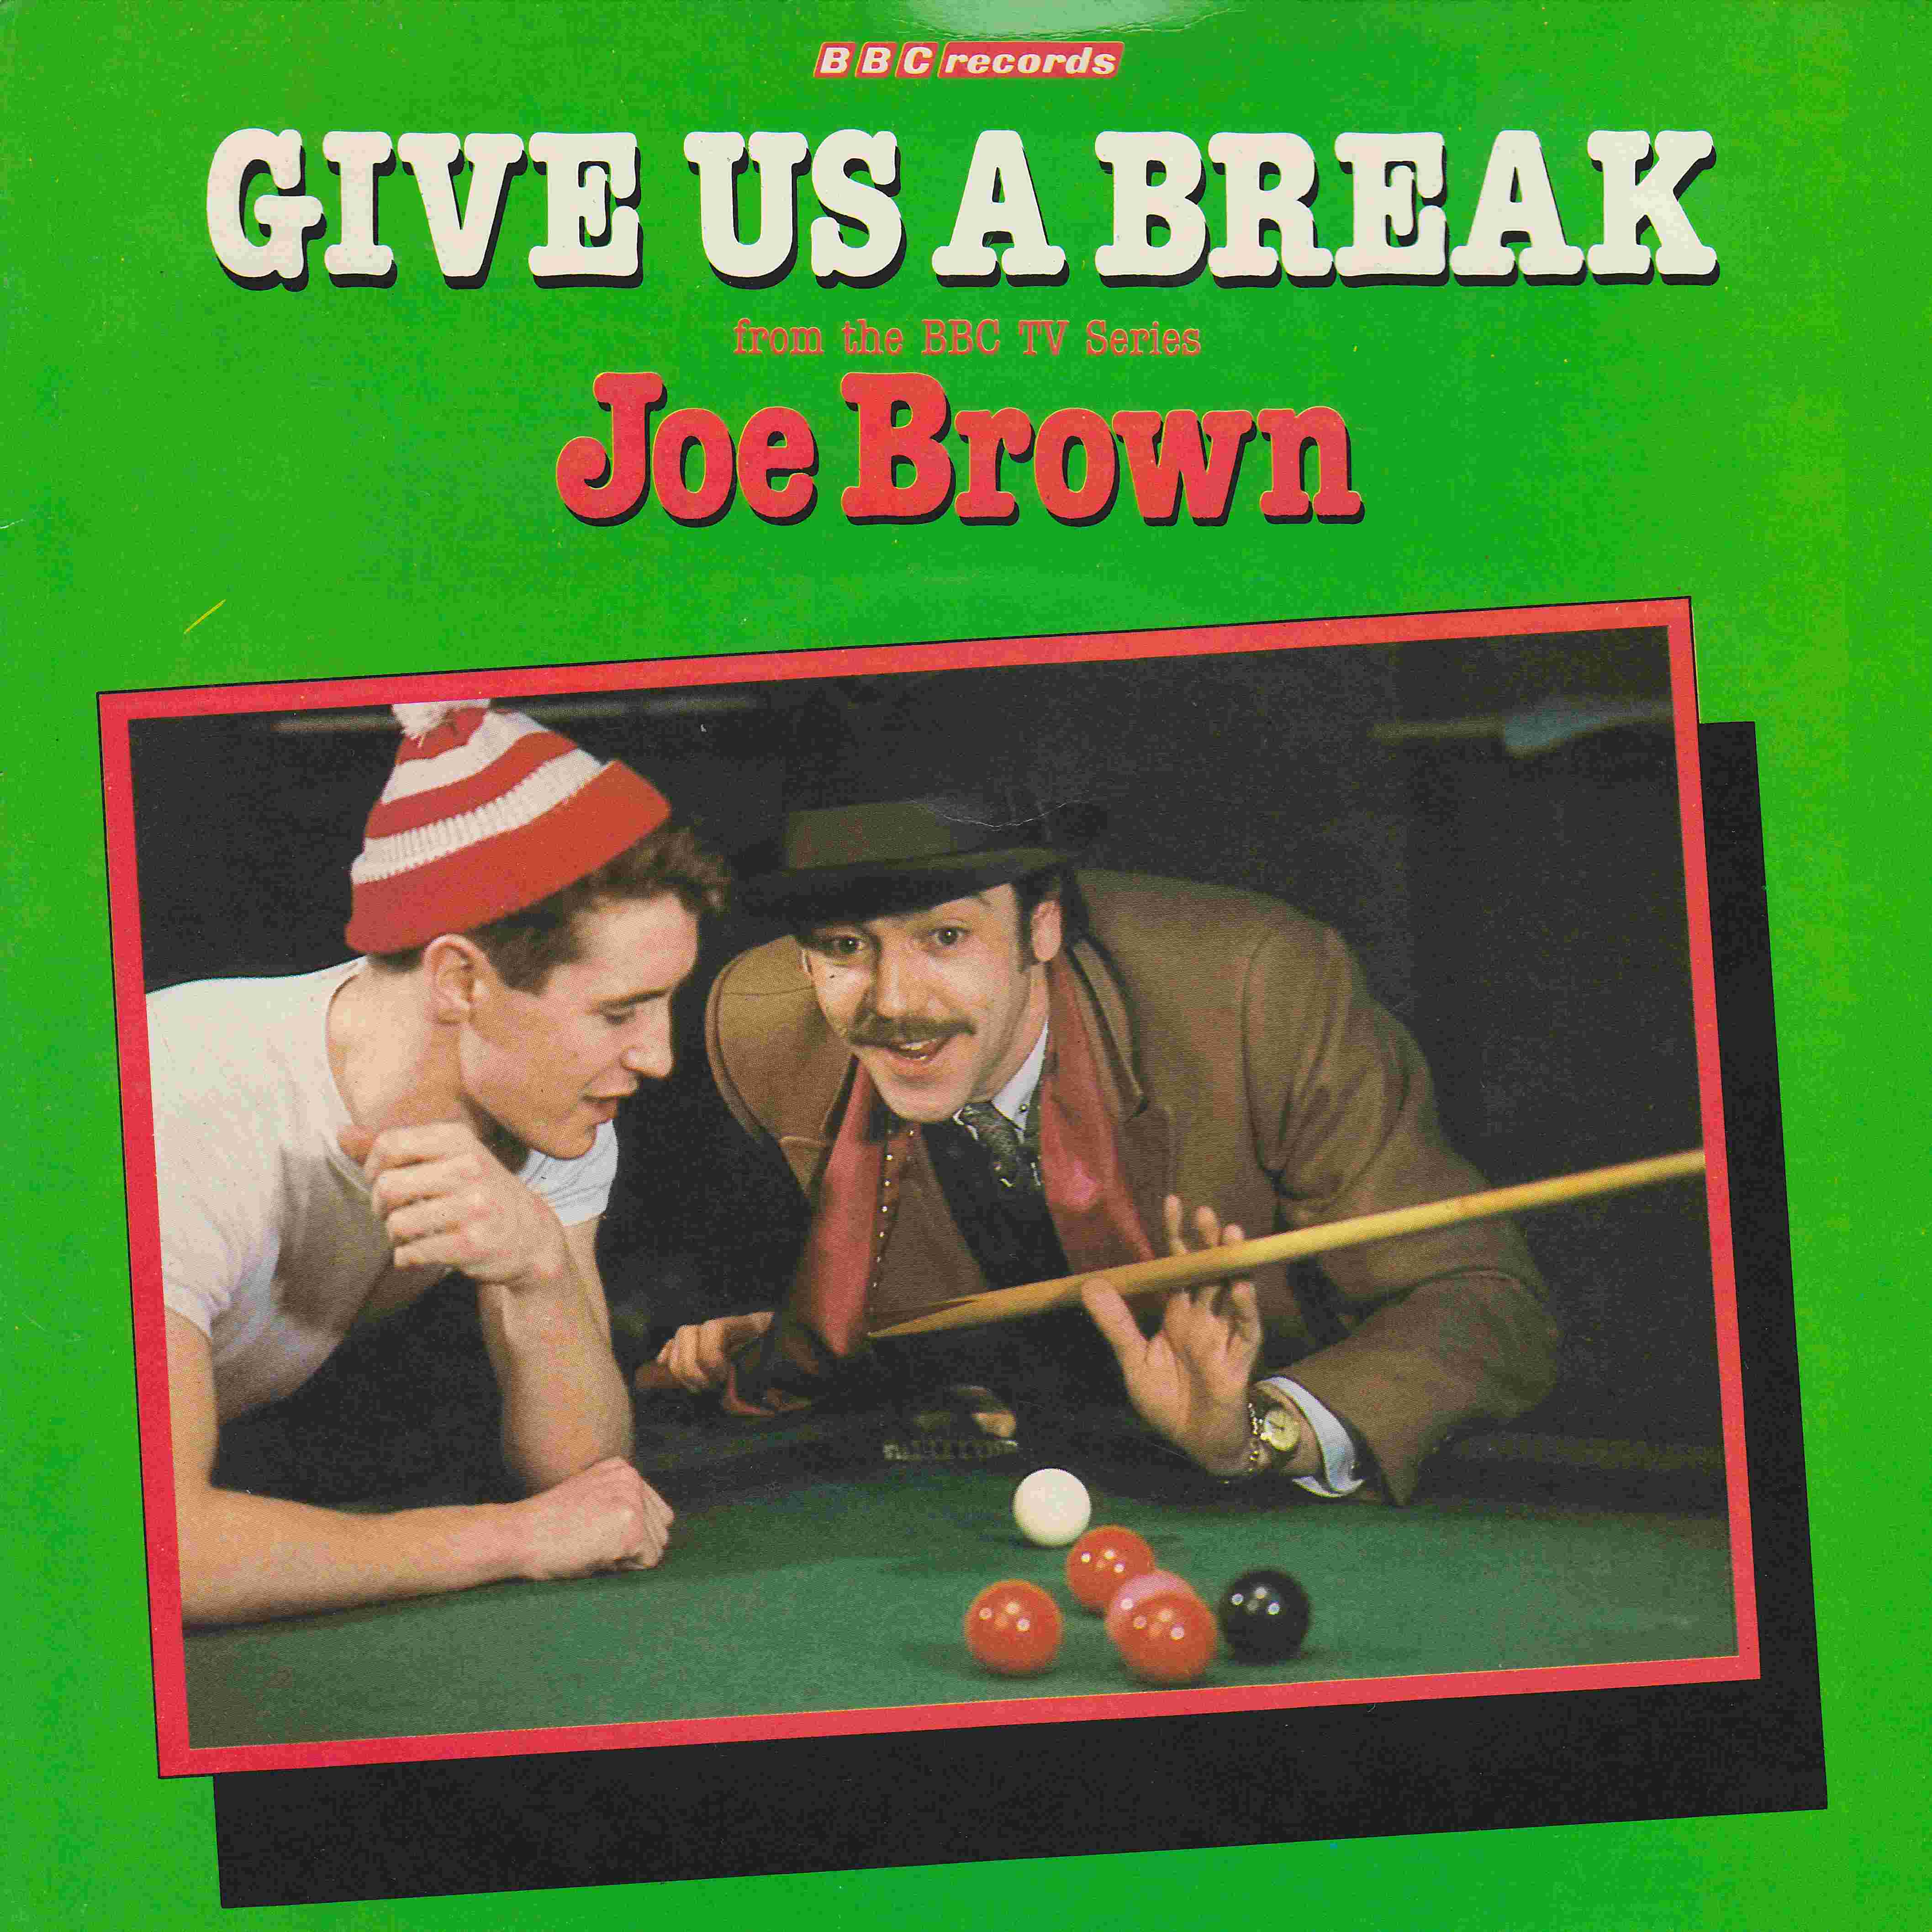 Picture of RESL 134 Give us a break by artist Joe Brown / Harry South / Leventon from the BBC singles - Records and Tapes library